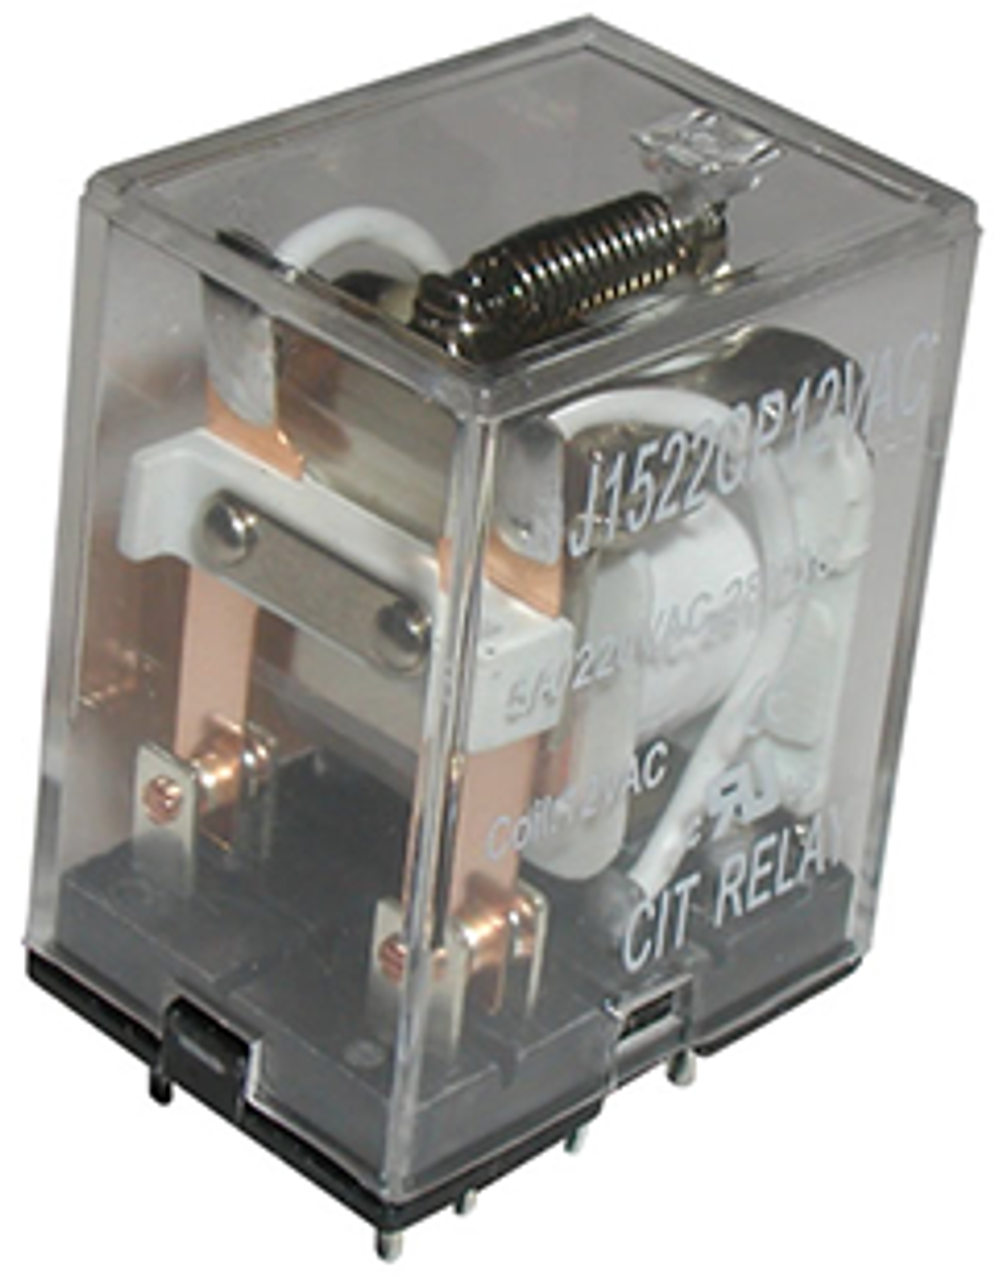 CIT Relay and Switch J1523CP110VACD Industrial Relays